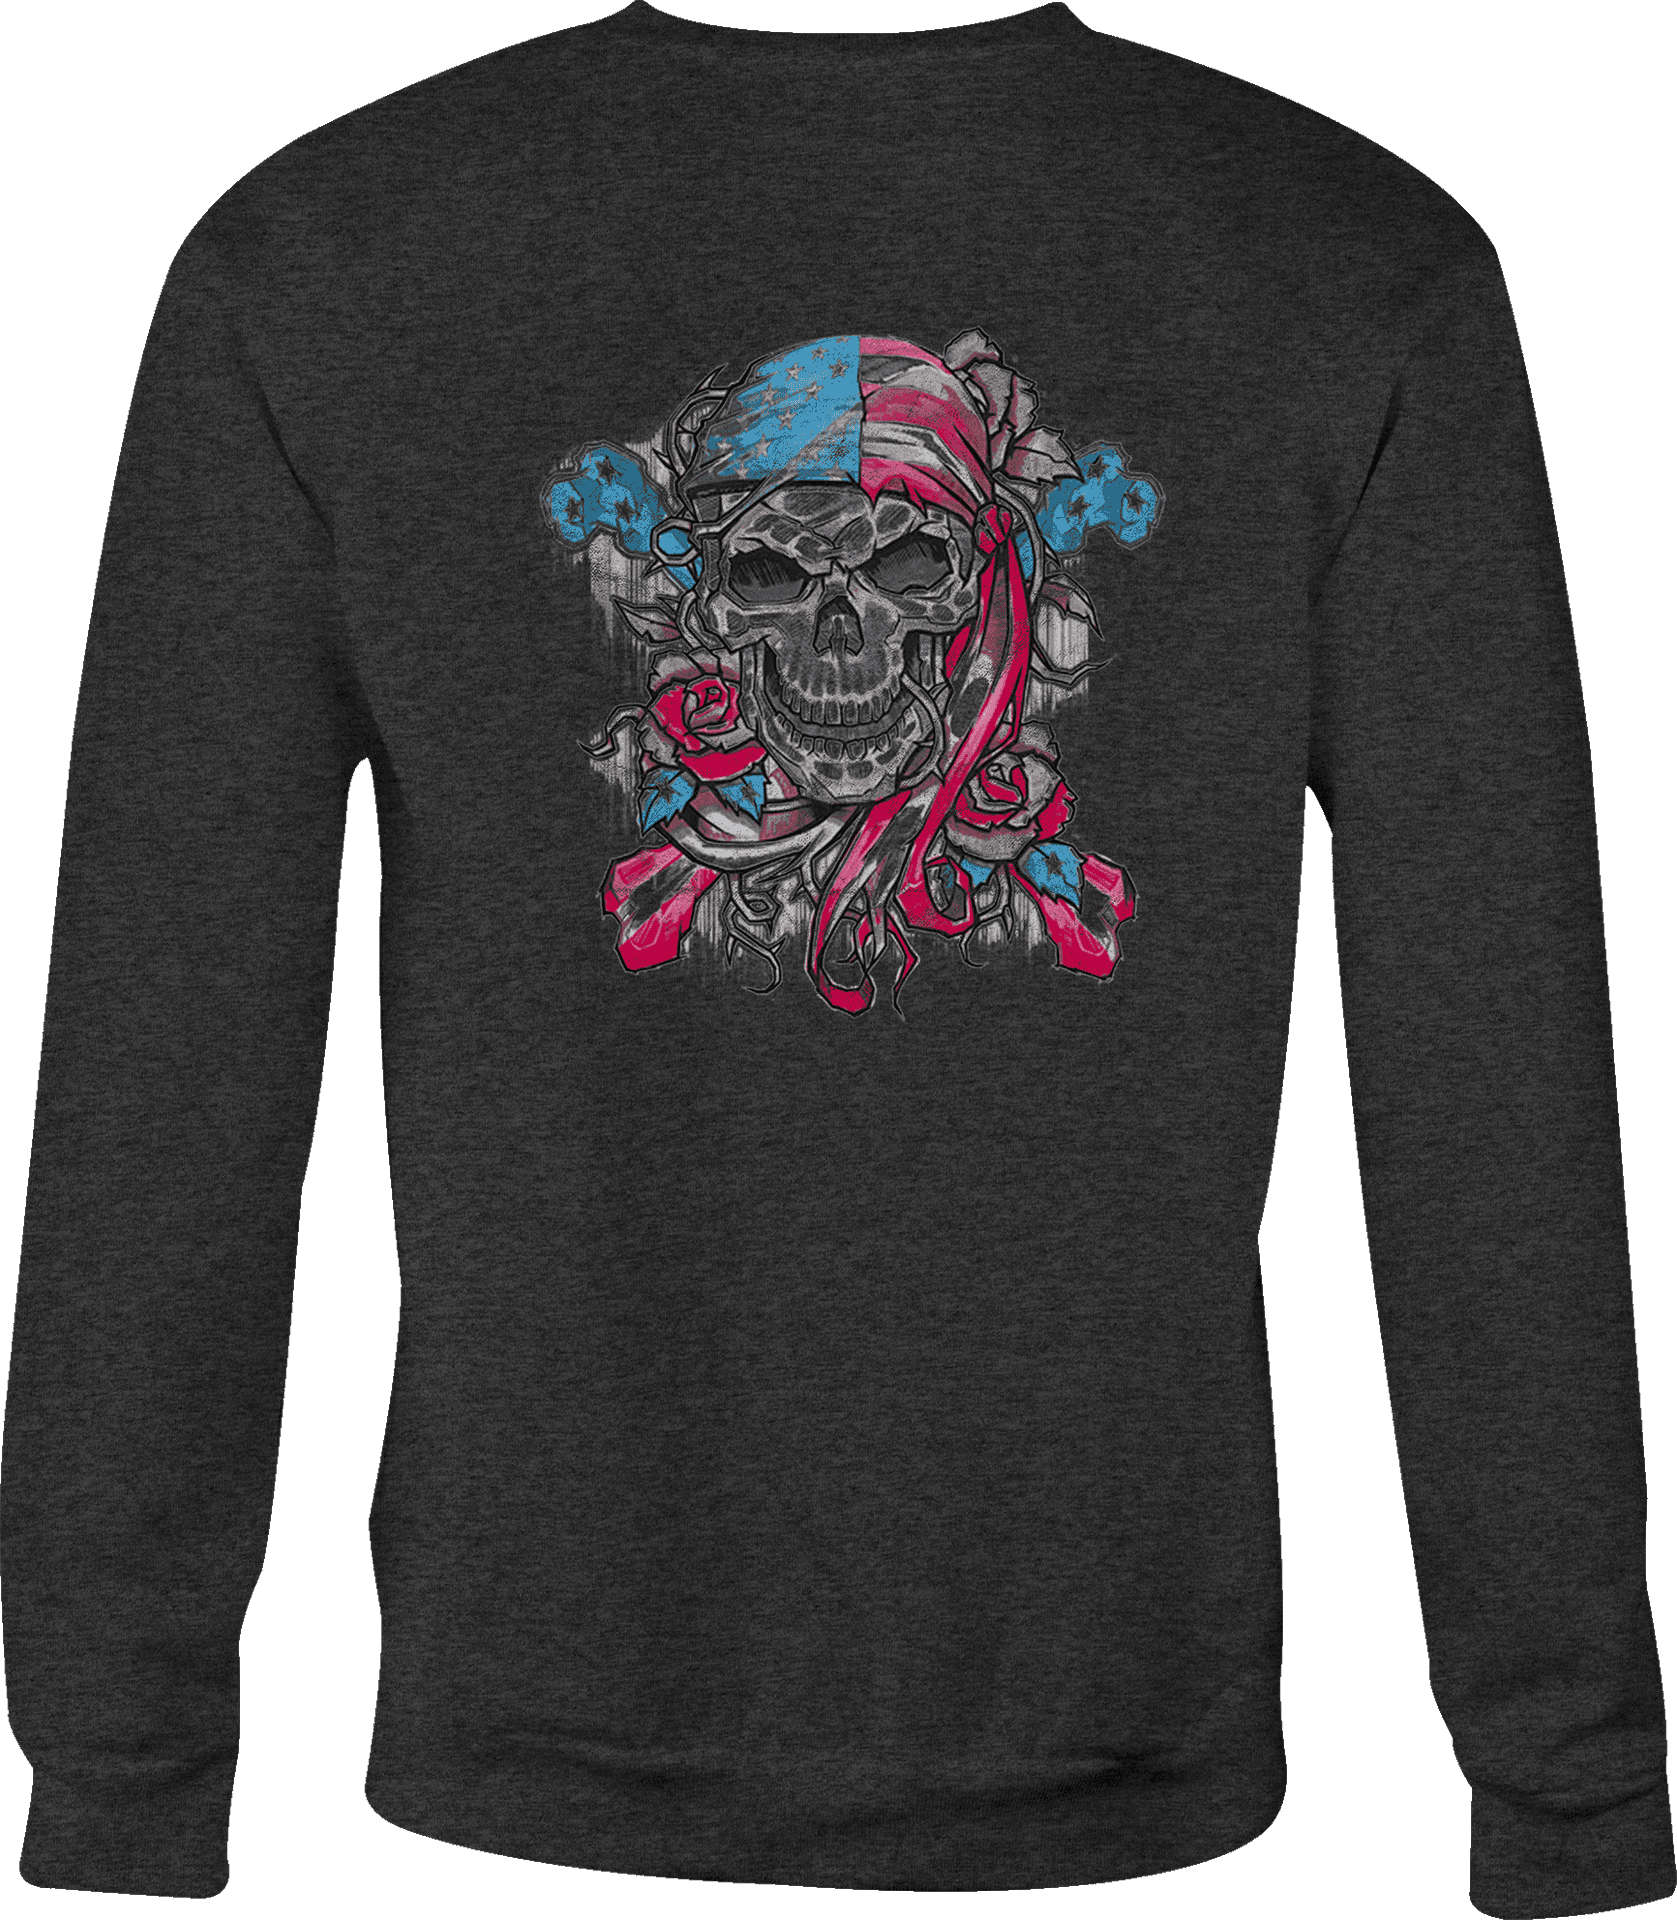 Skull Pirate Graphic Long Sleeve Shirt PNG image